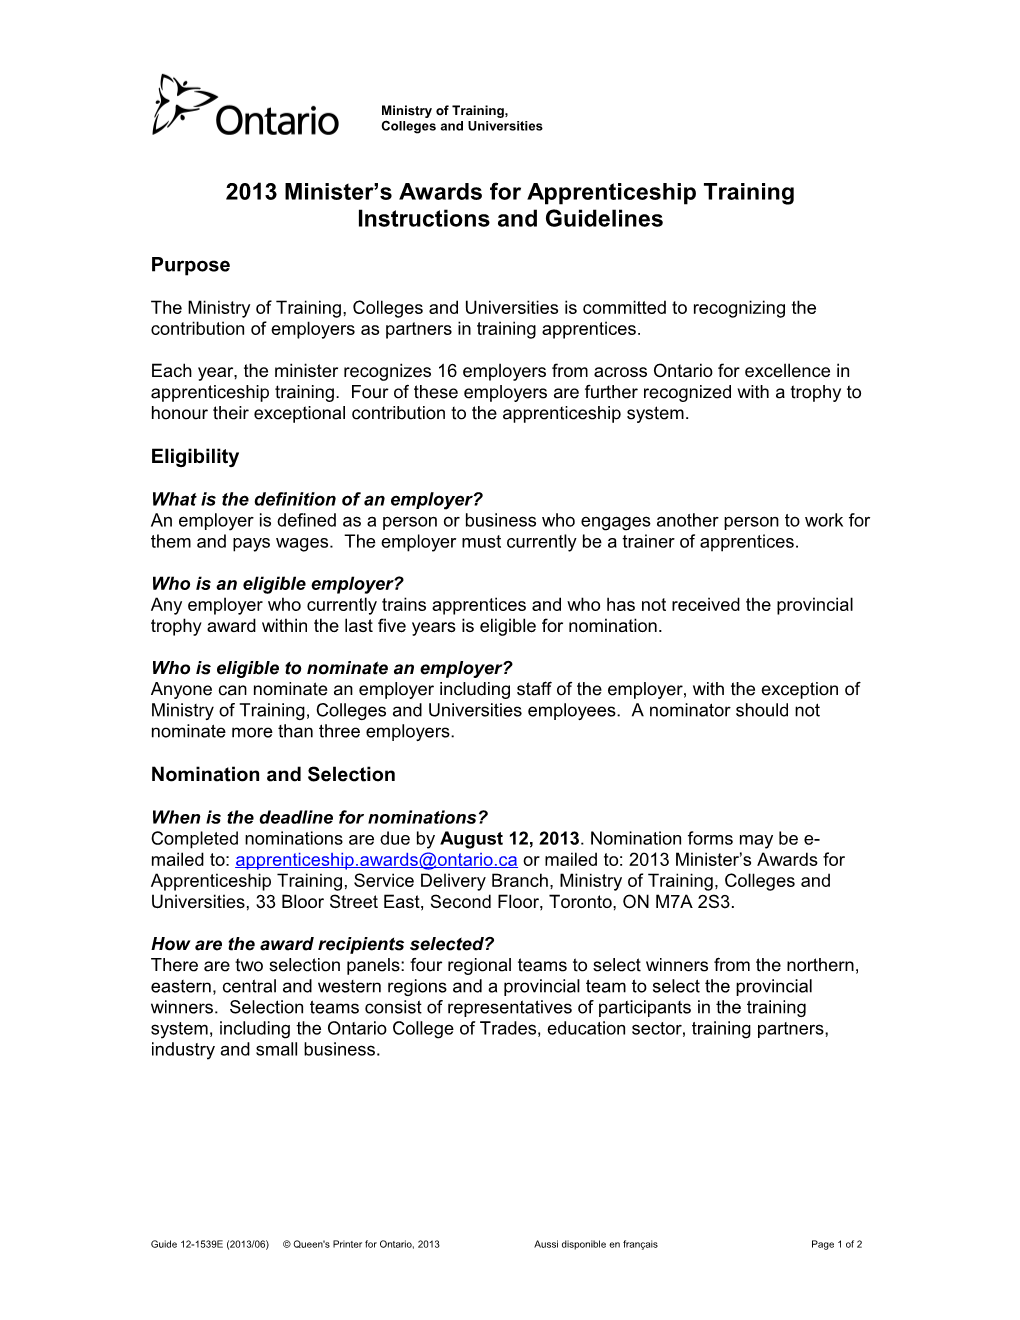 2012 Minister's Awards for Apprenticeship Training - Instructions and Guidelines